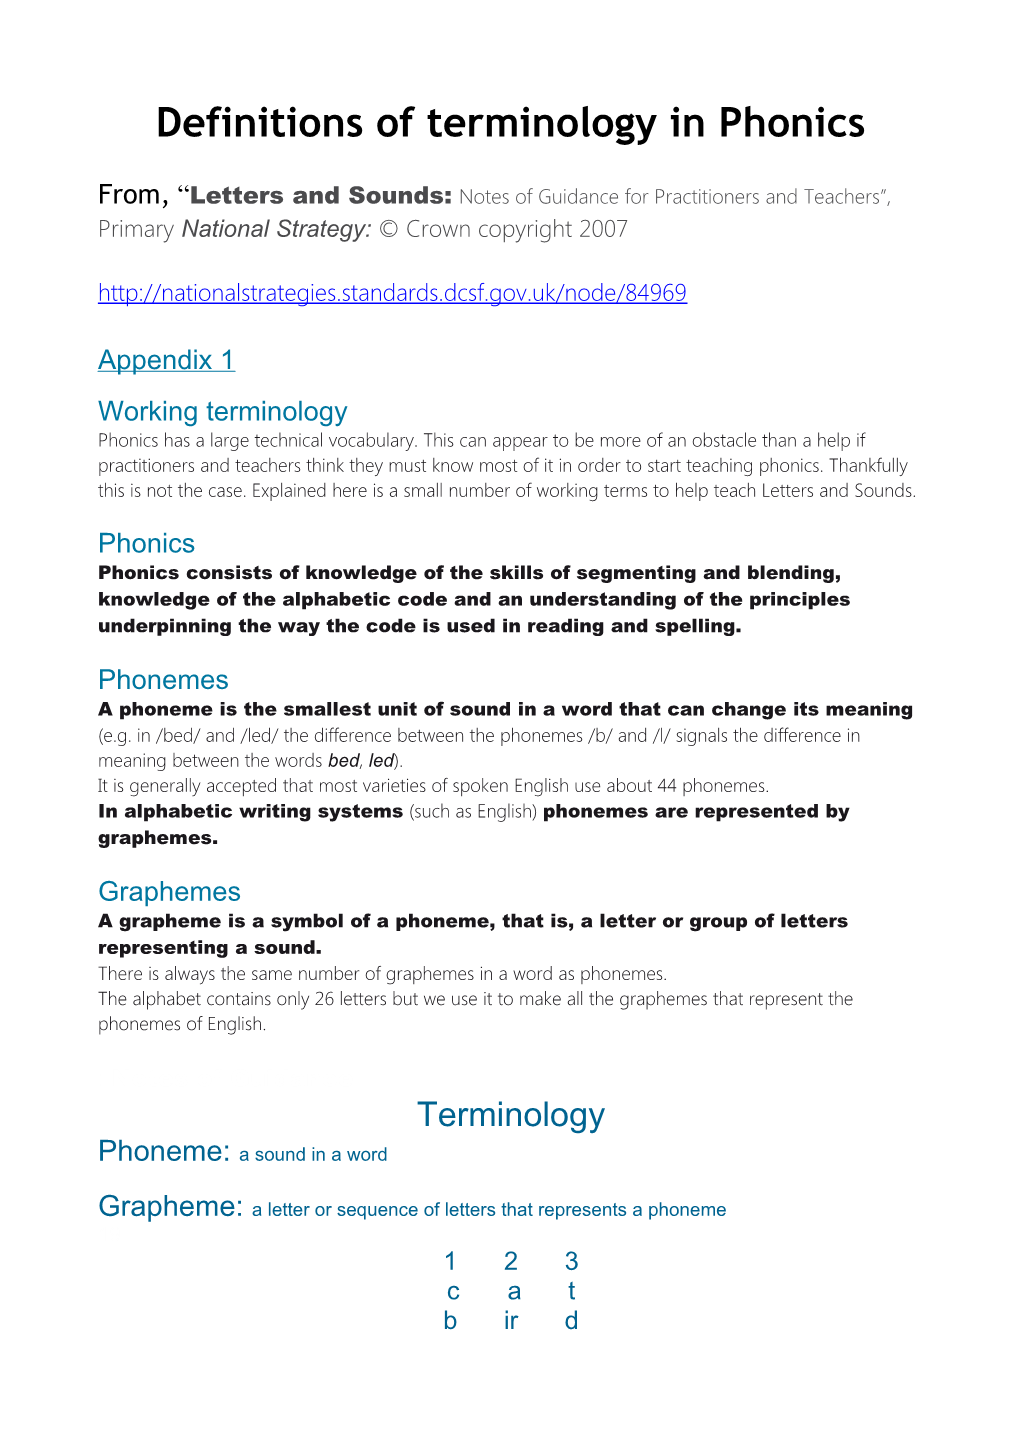 Definitions of Terminology in Phonics